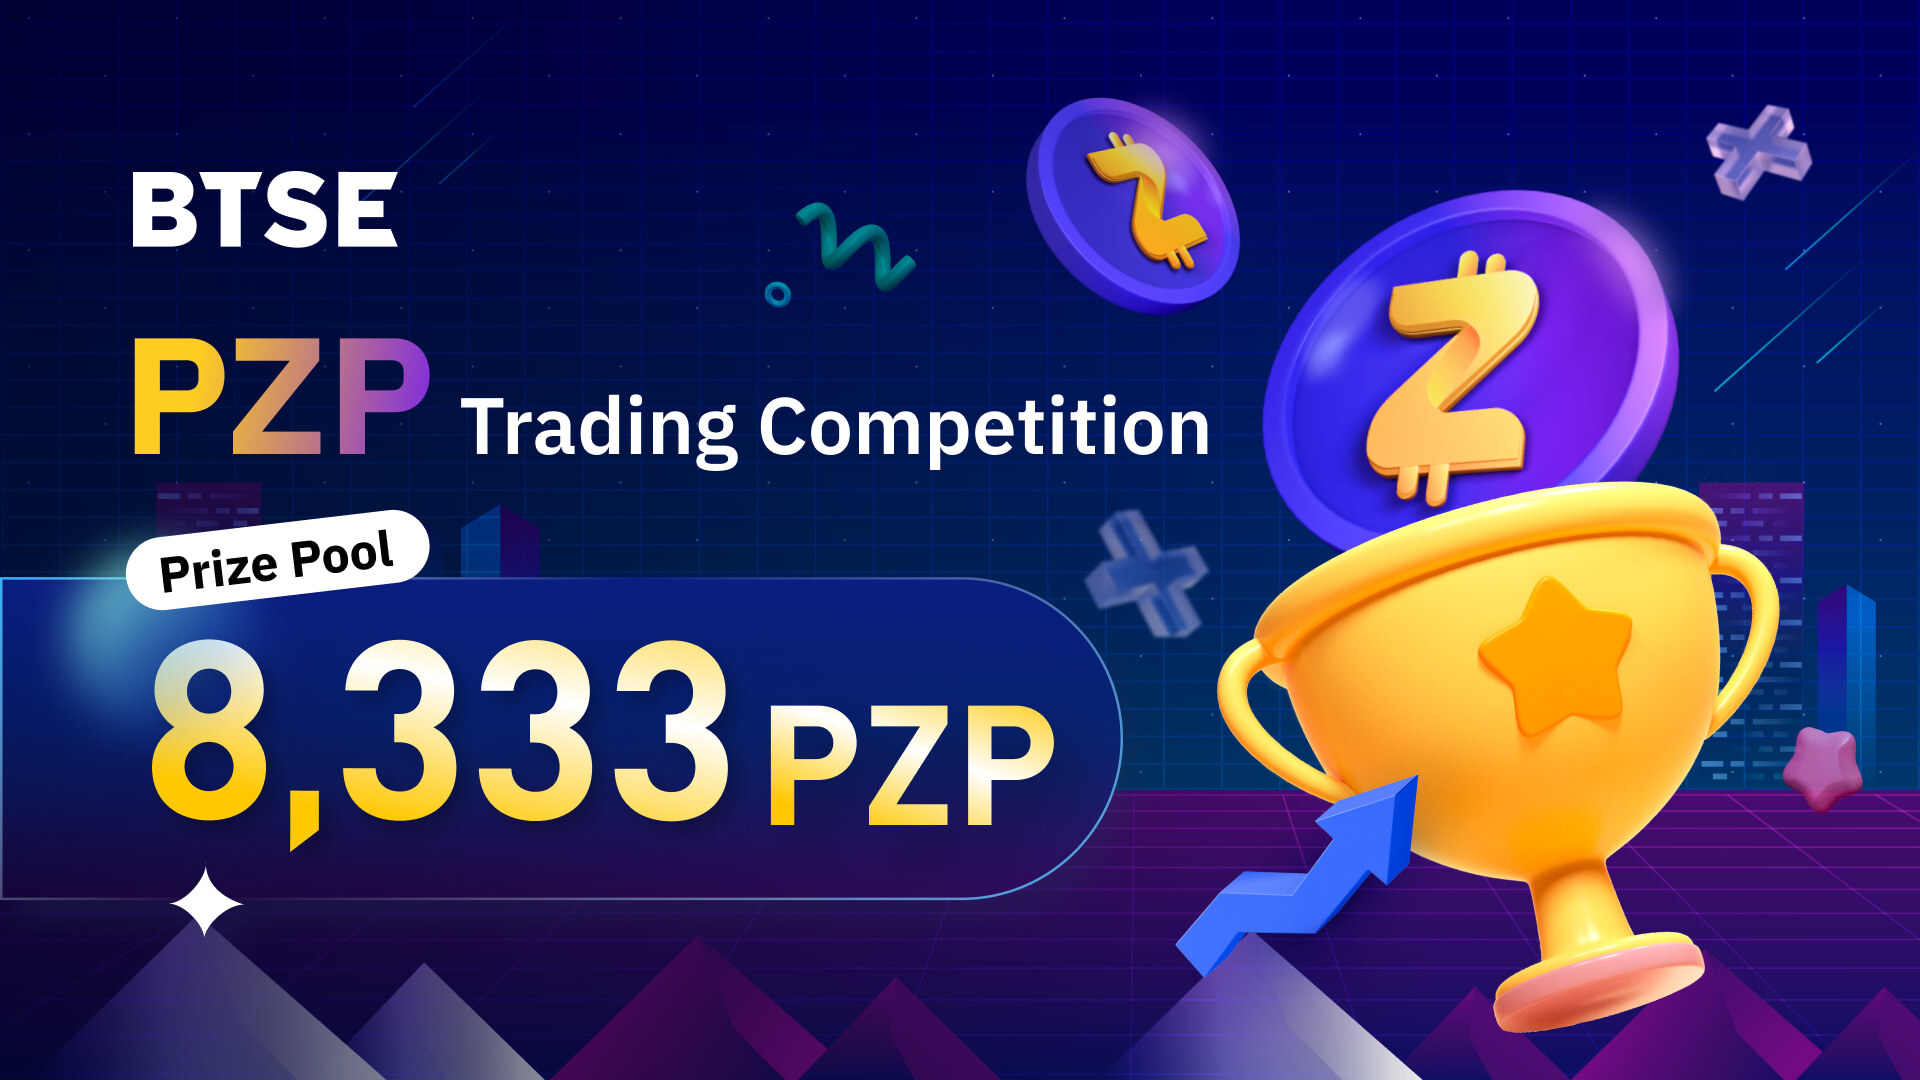 PZP Trading Competition! Trade to Share 8,333 PZP Tokens!